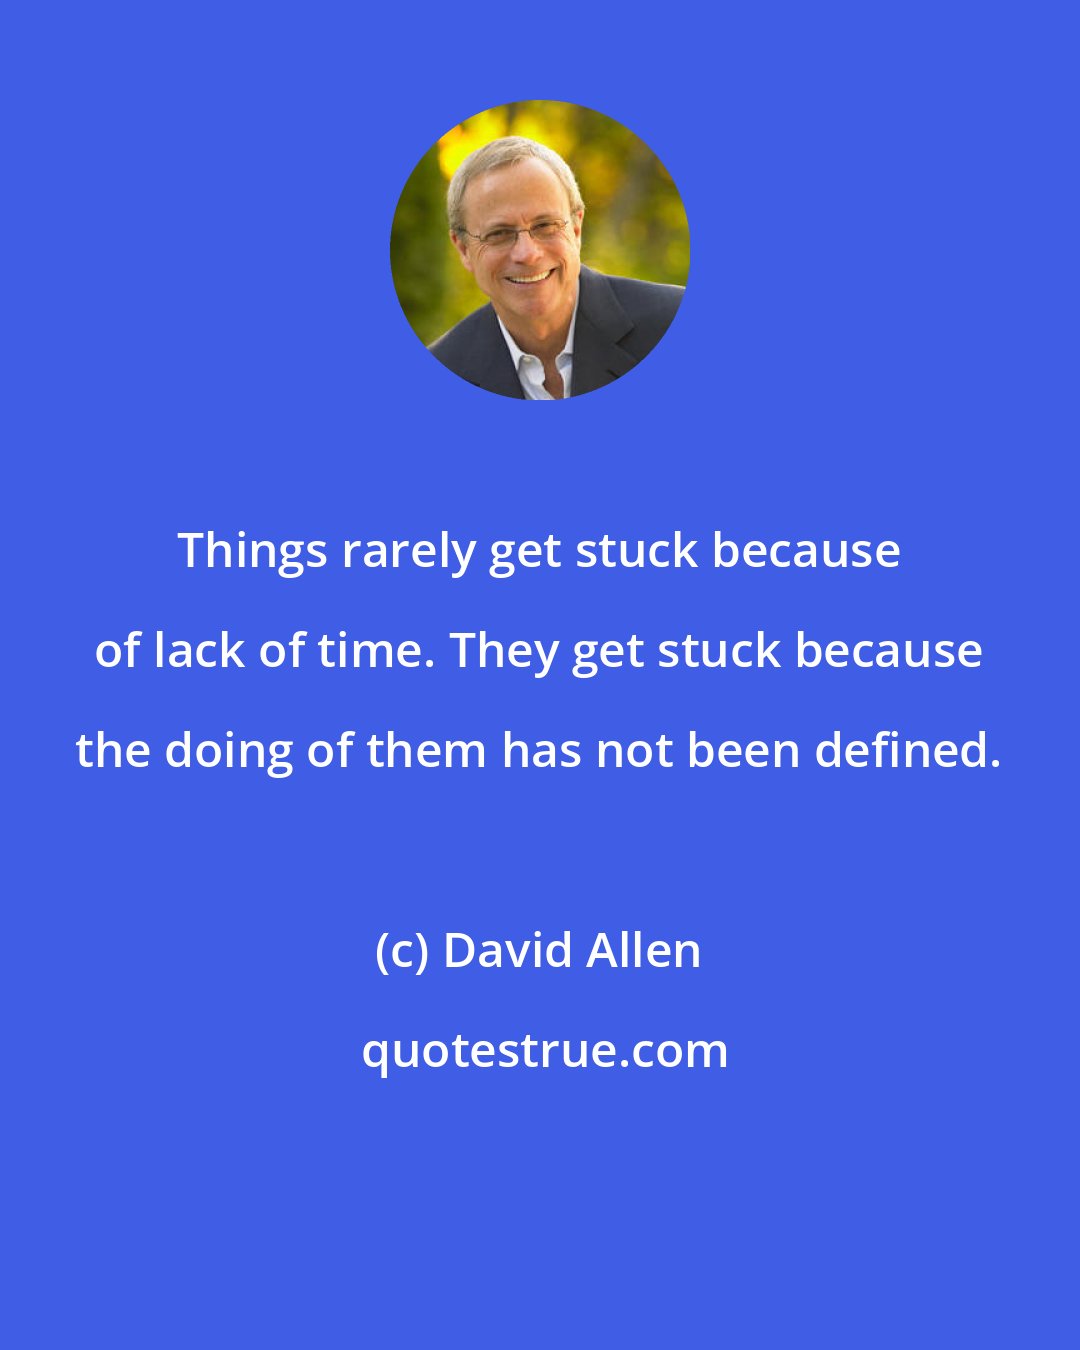 David Allen: Things rarely get stuck because of lack of time. They get stuck because the doing of them has not been defined.